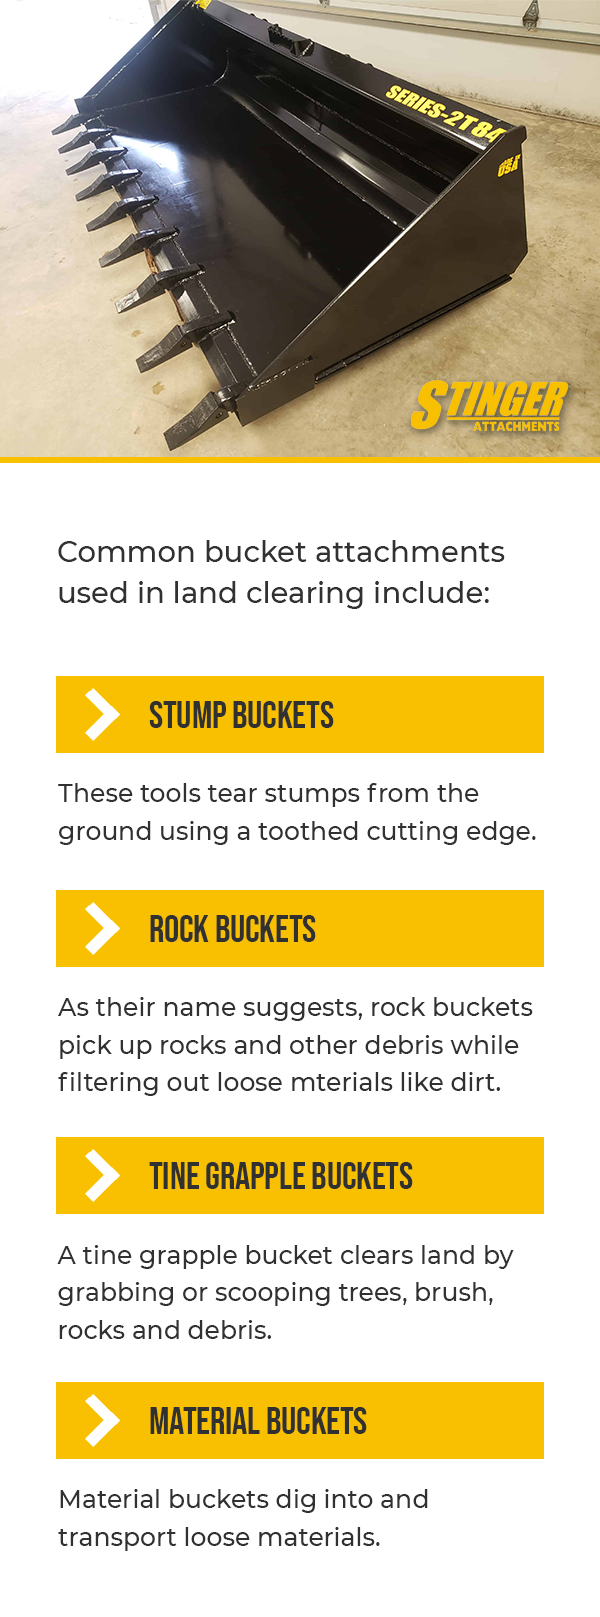 List of Bucket Attachments